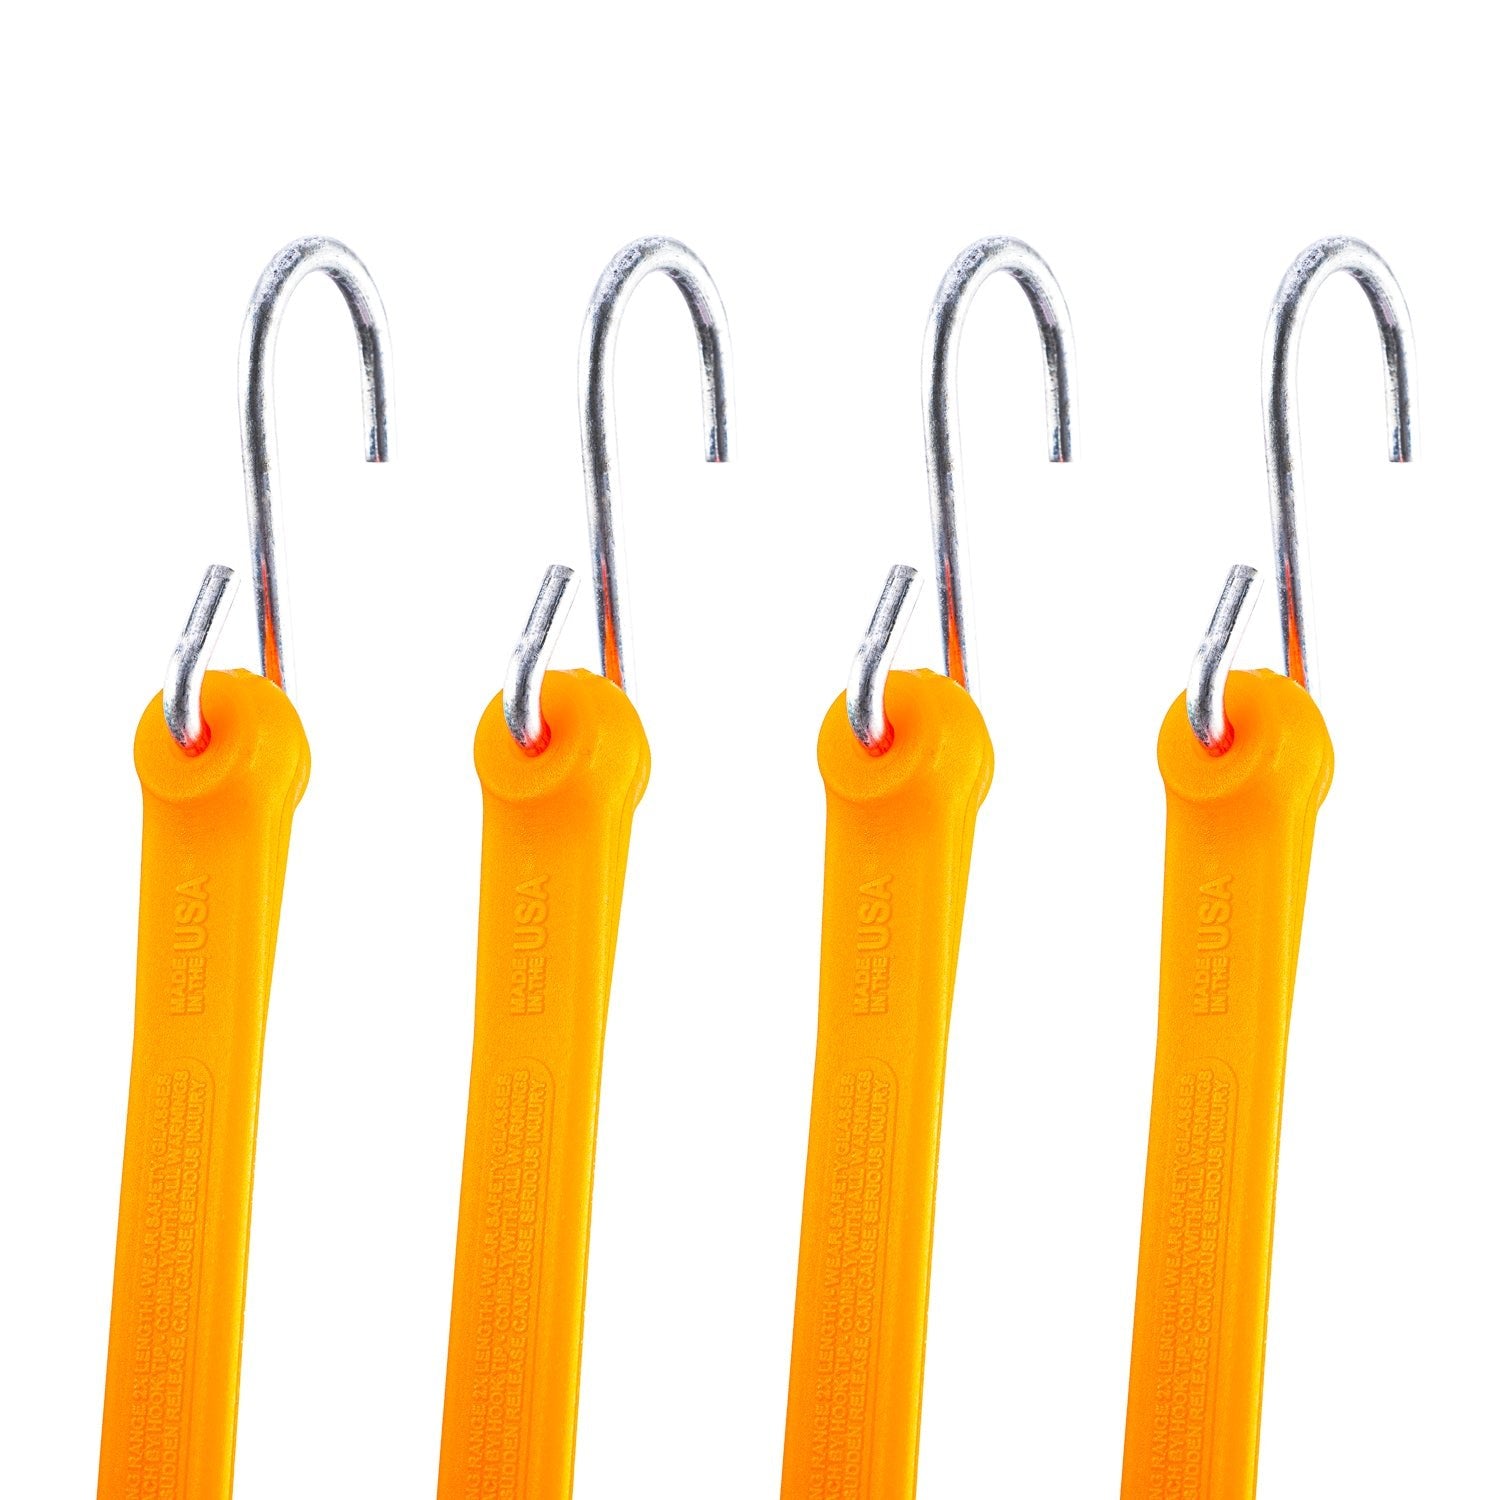 PERFECT BUNGEE 12 EASY STRETCH BUNGEE CORD 4 PACK